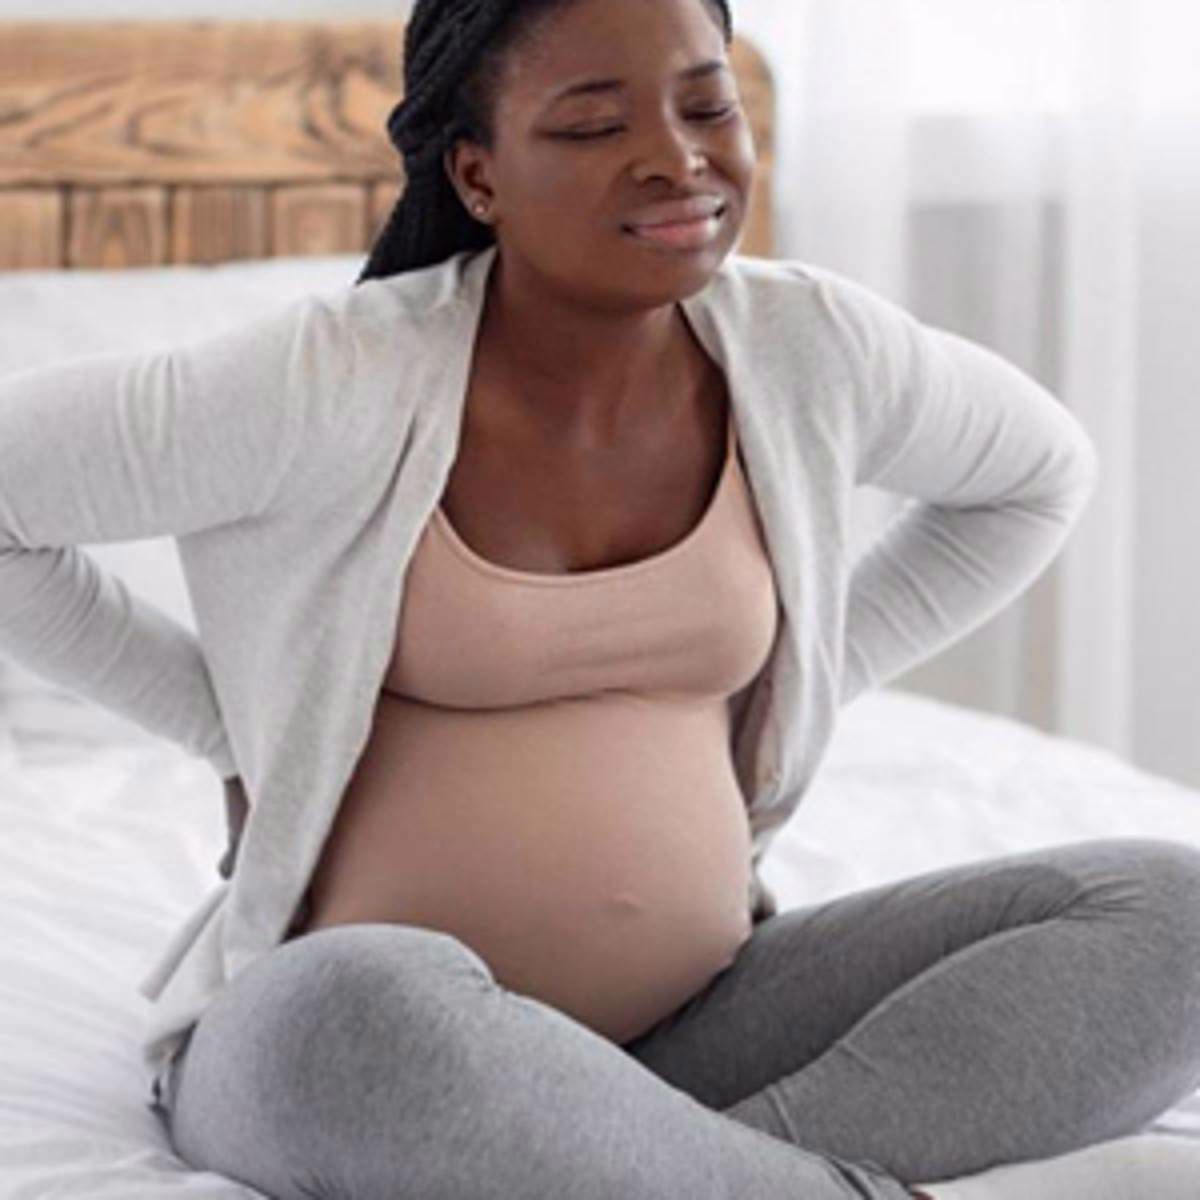 Pregnancy Complications and Why They Occur